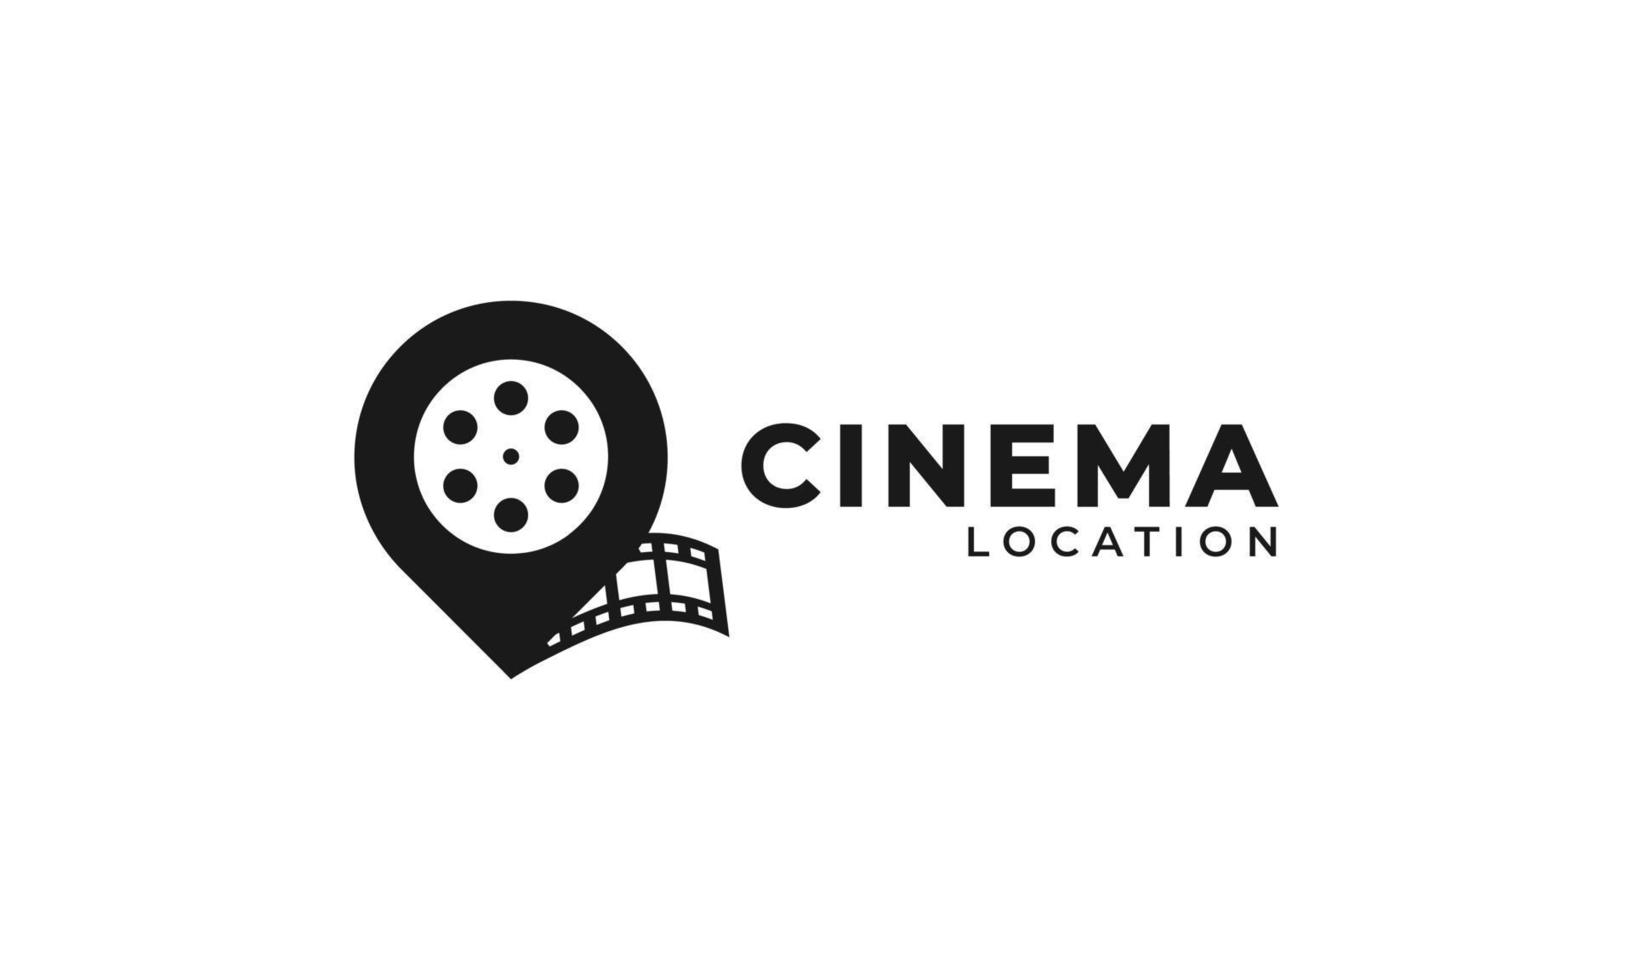 Map Pin Location with Camera Reel Stripes Filmstrip Logo. Film location glyph icon Vector